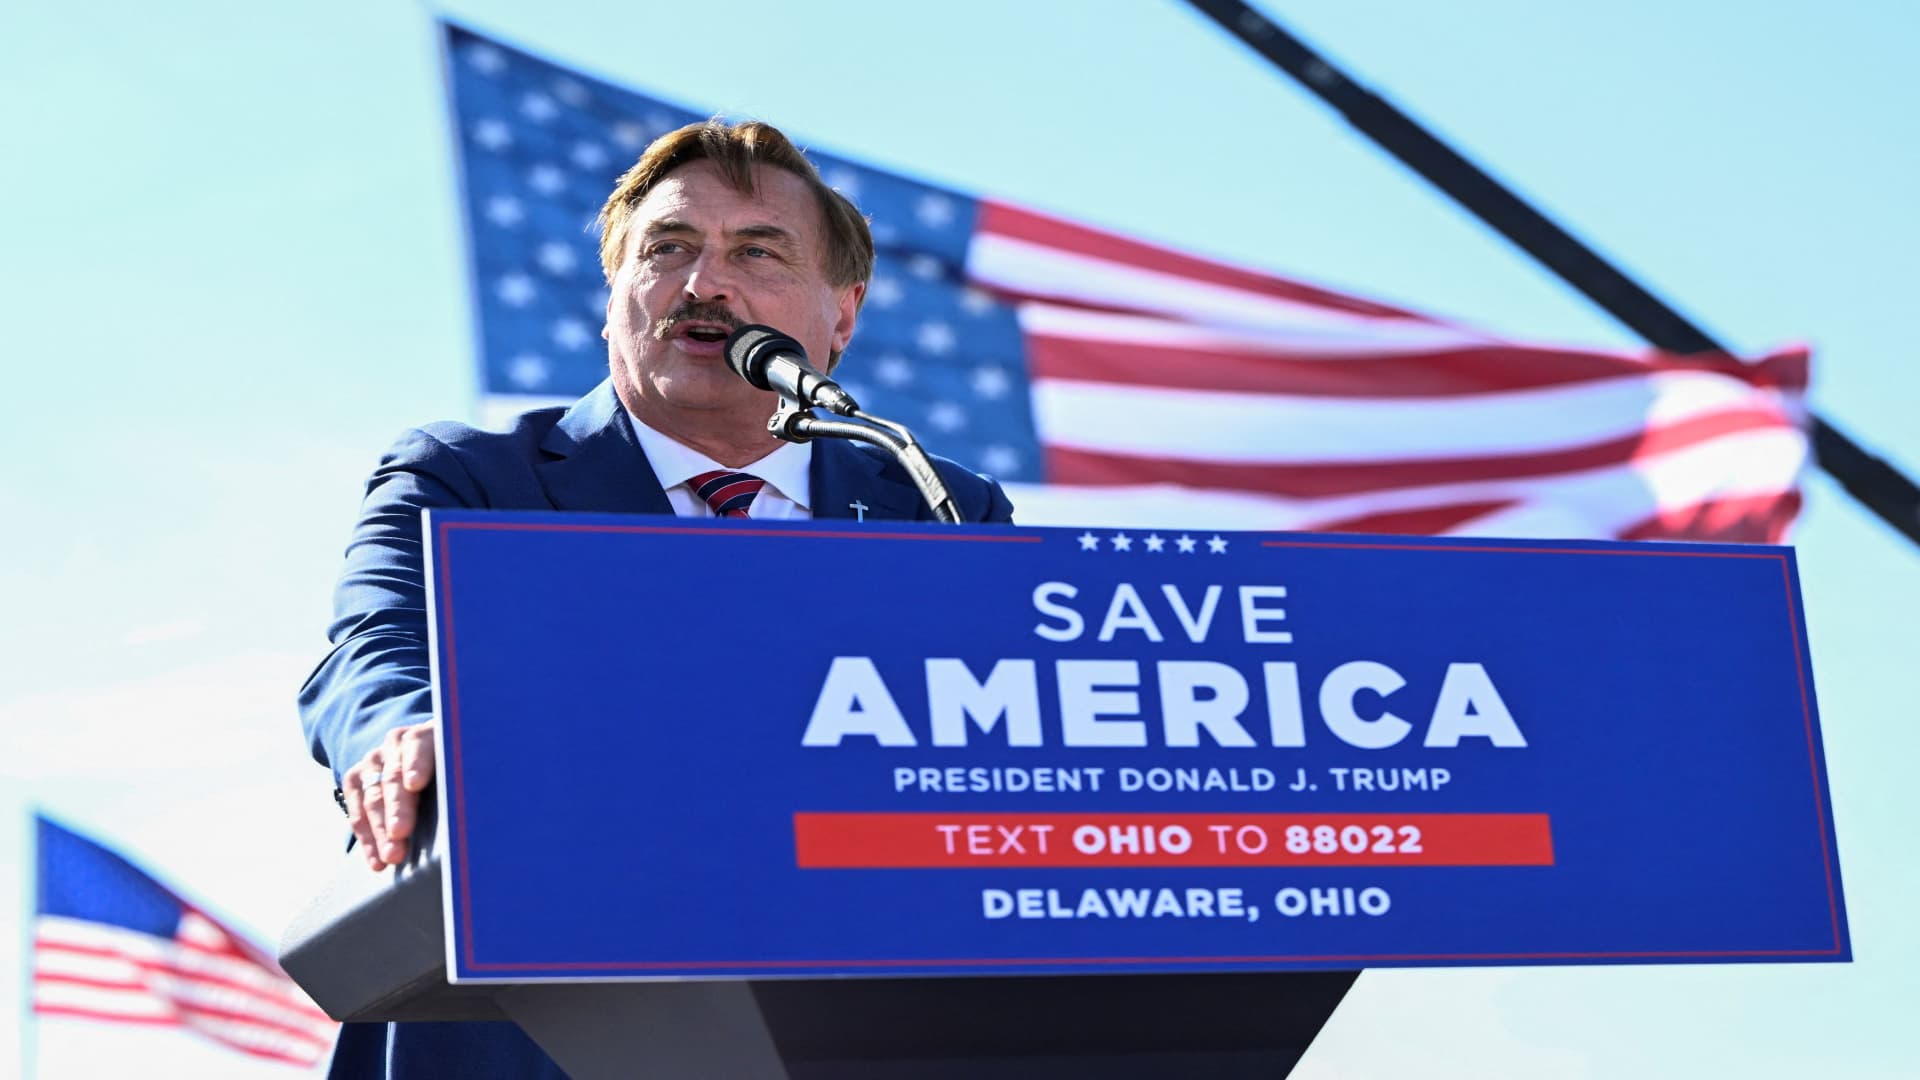 Michael J. Lindell, the My Pillow Guy, speaks on stage during an event hosted by former U.S. President Donald Trump at the county fairgrounds in Delaware, Ohio, U.S., April 23, 2022. 